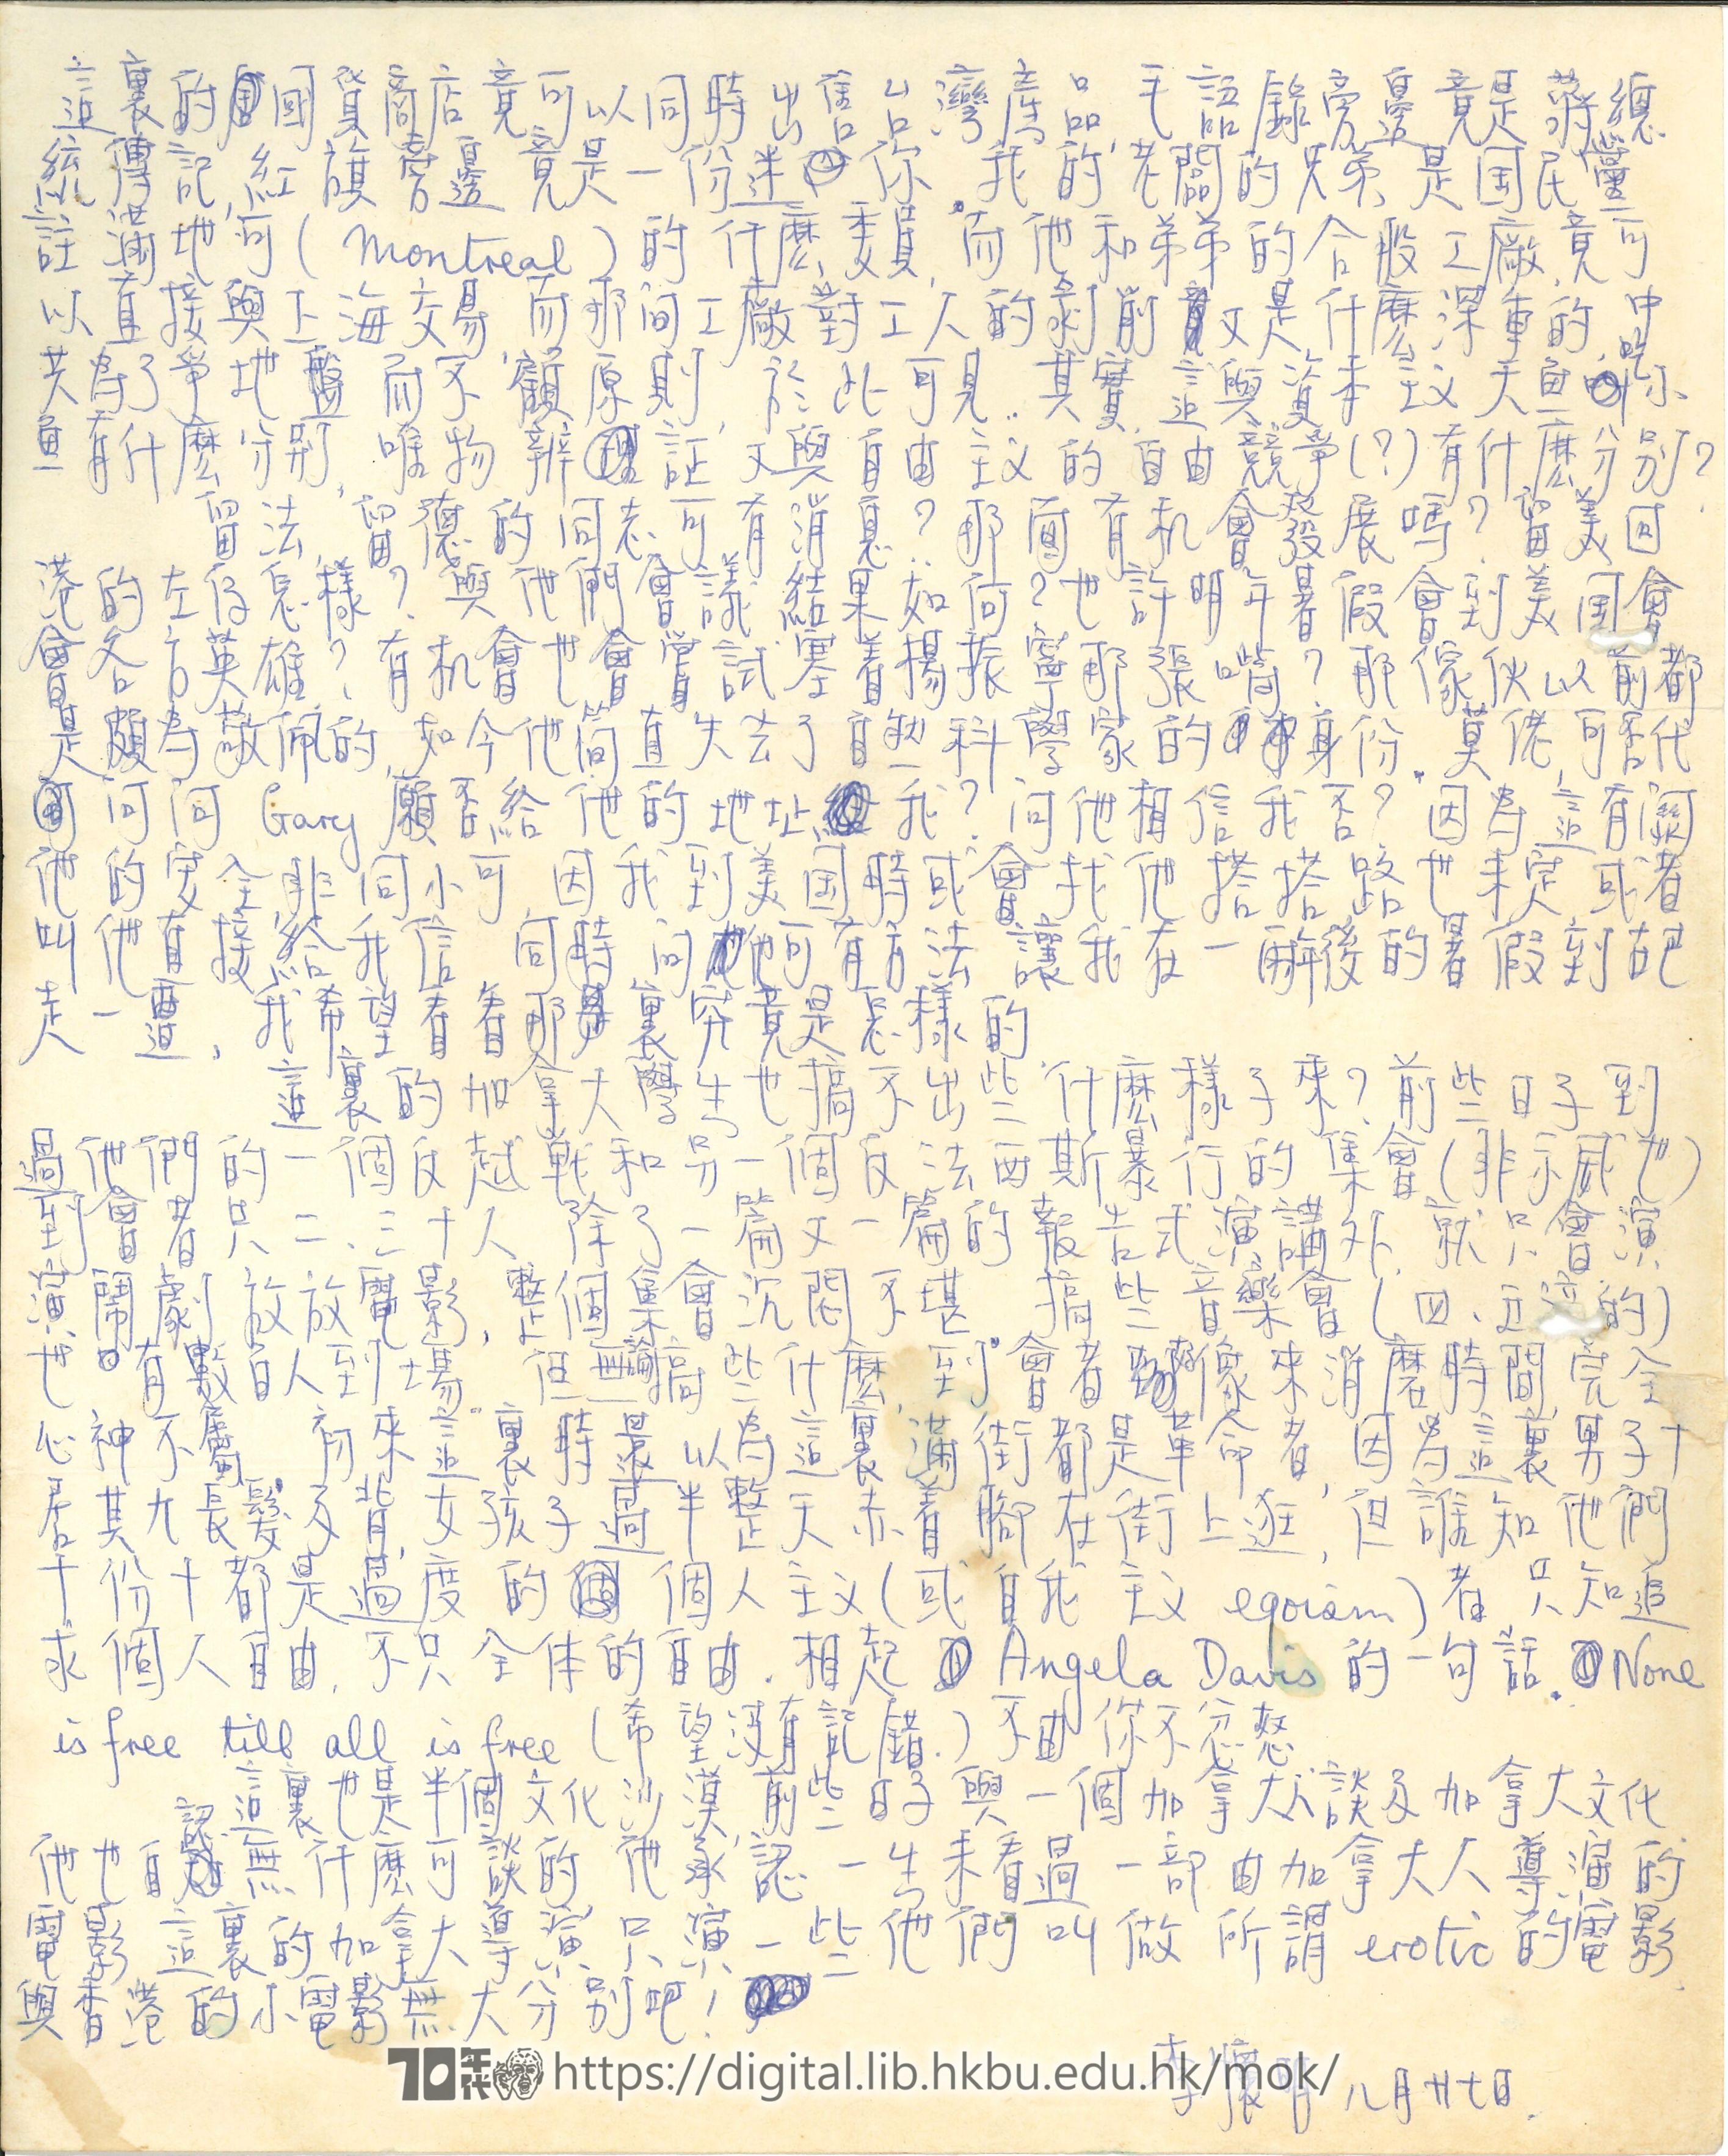   Letter from Lee Wai-ming to Mok Chiu Yu and friends 李懷明 